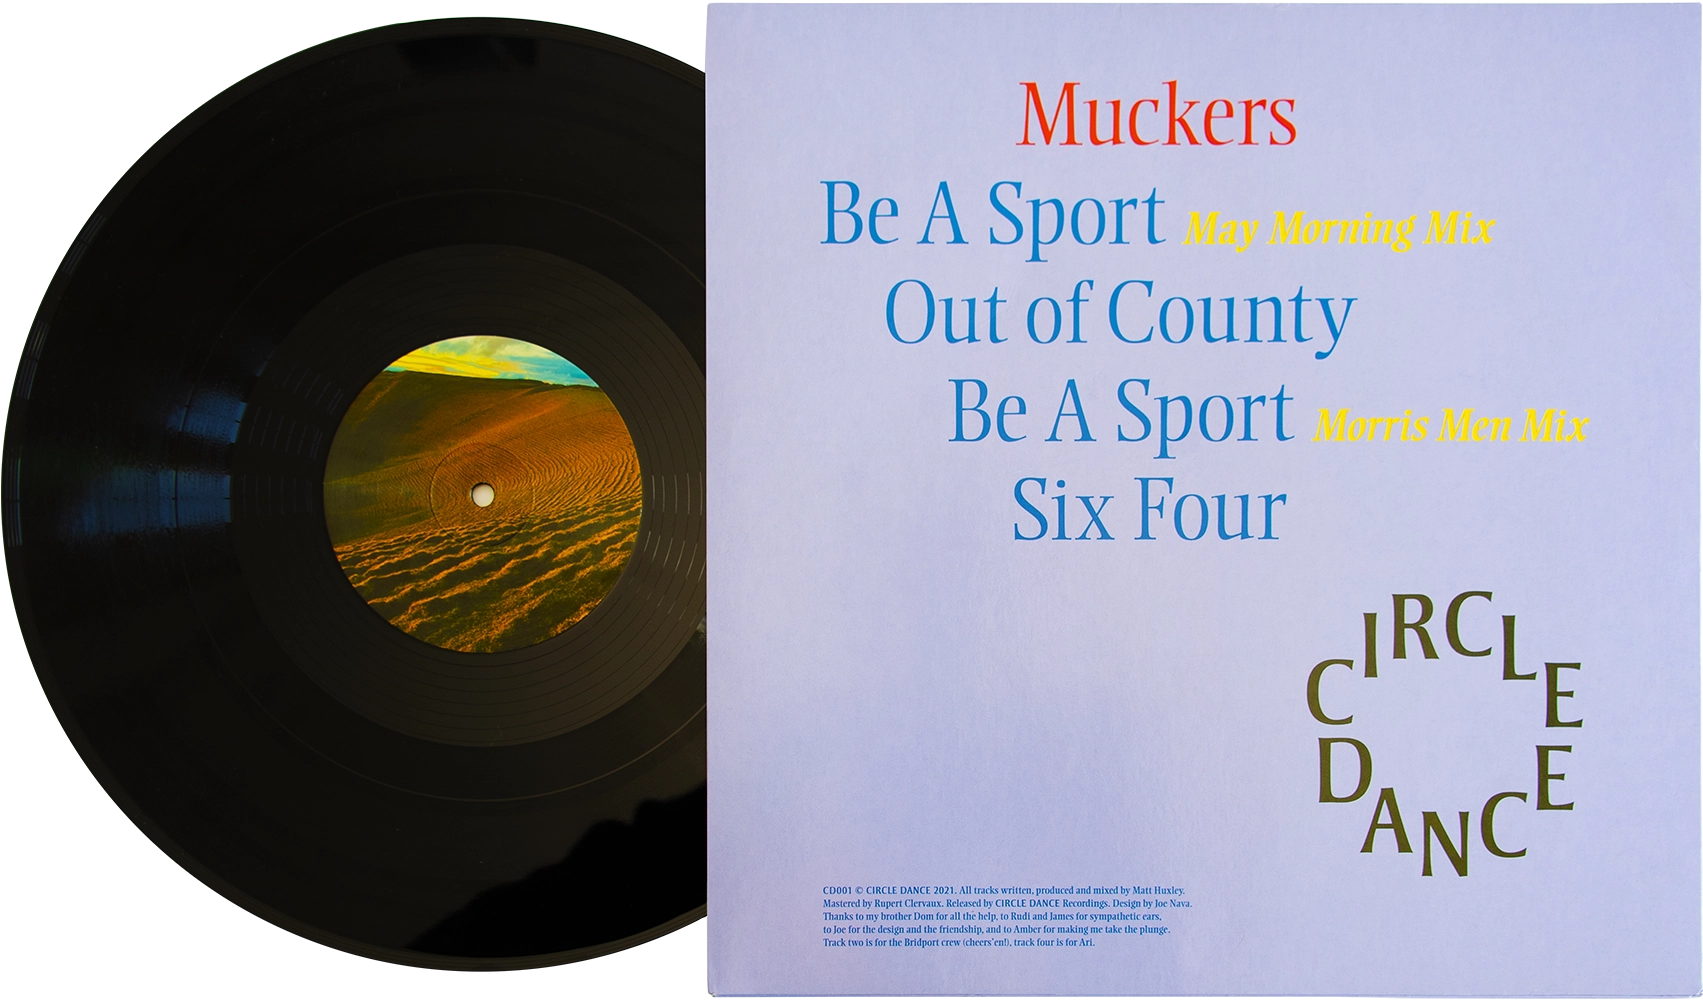 Rear Cover of Muckers, Out of County, vinyl release